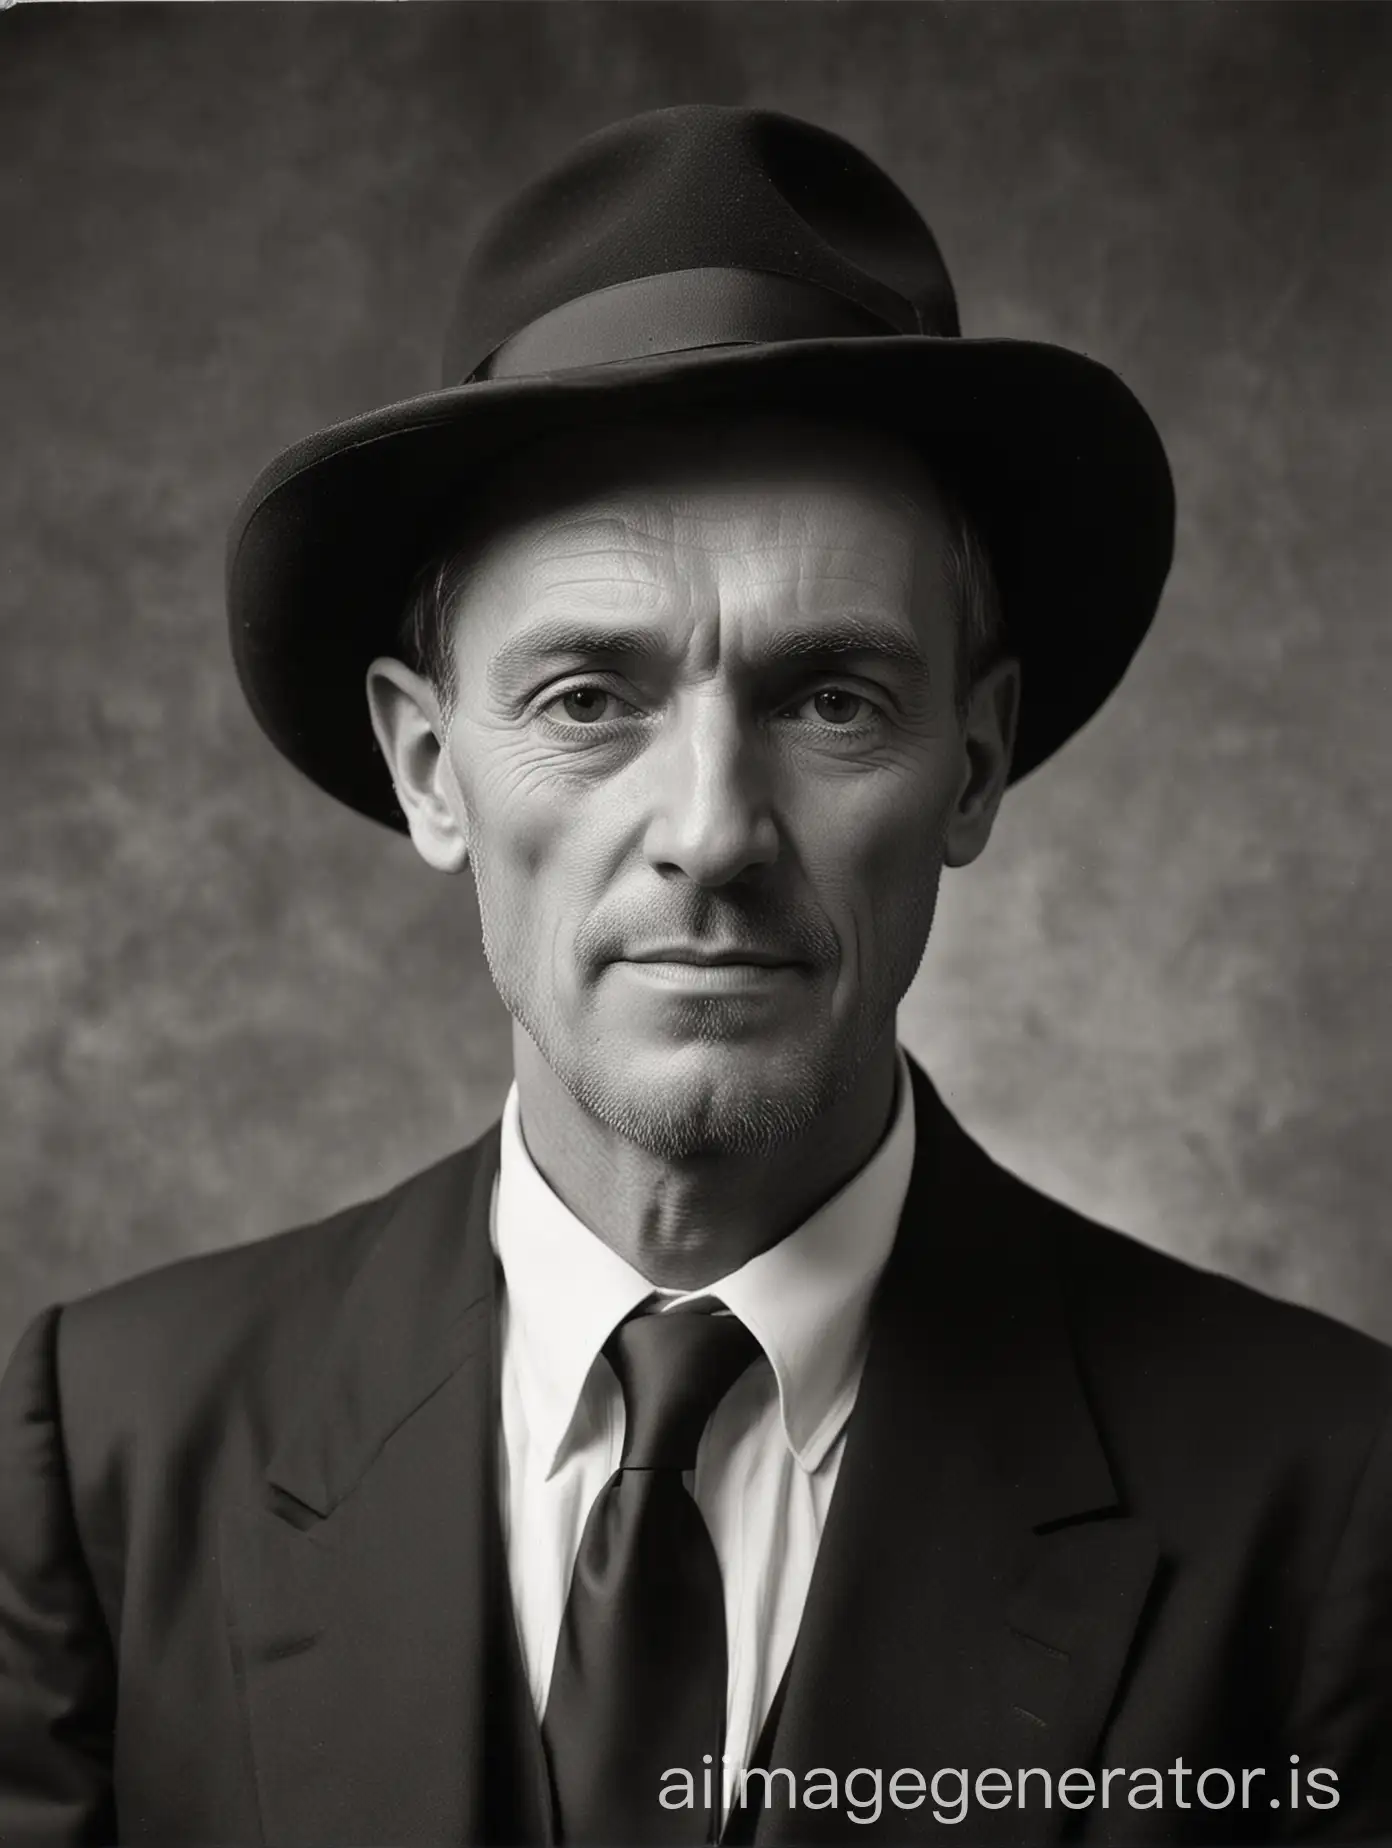 Vintage-Black-and-White-Portrait-of-a-Man-in-a-Suit-and-Hat